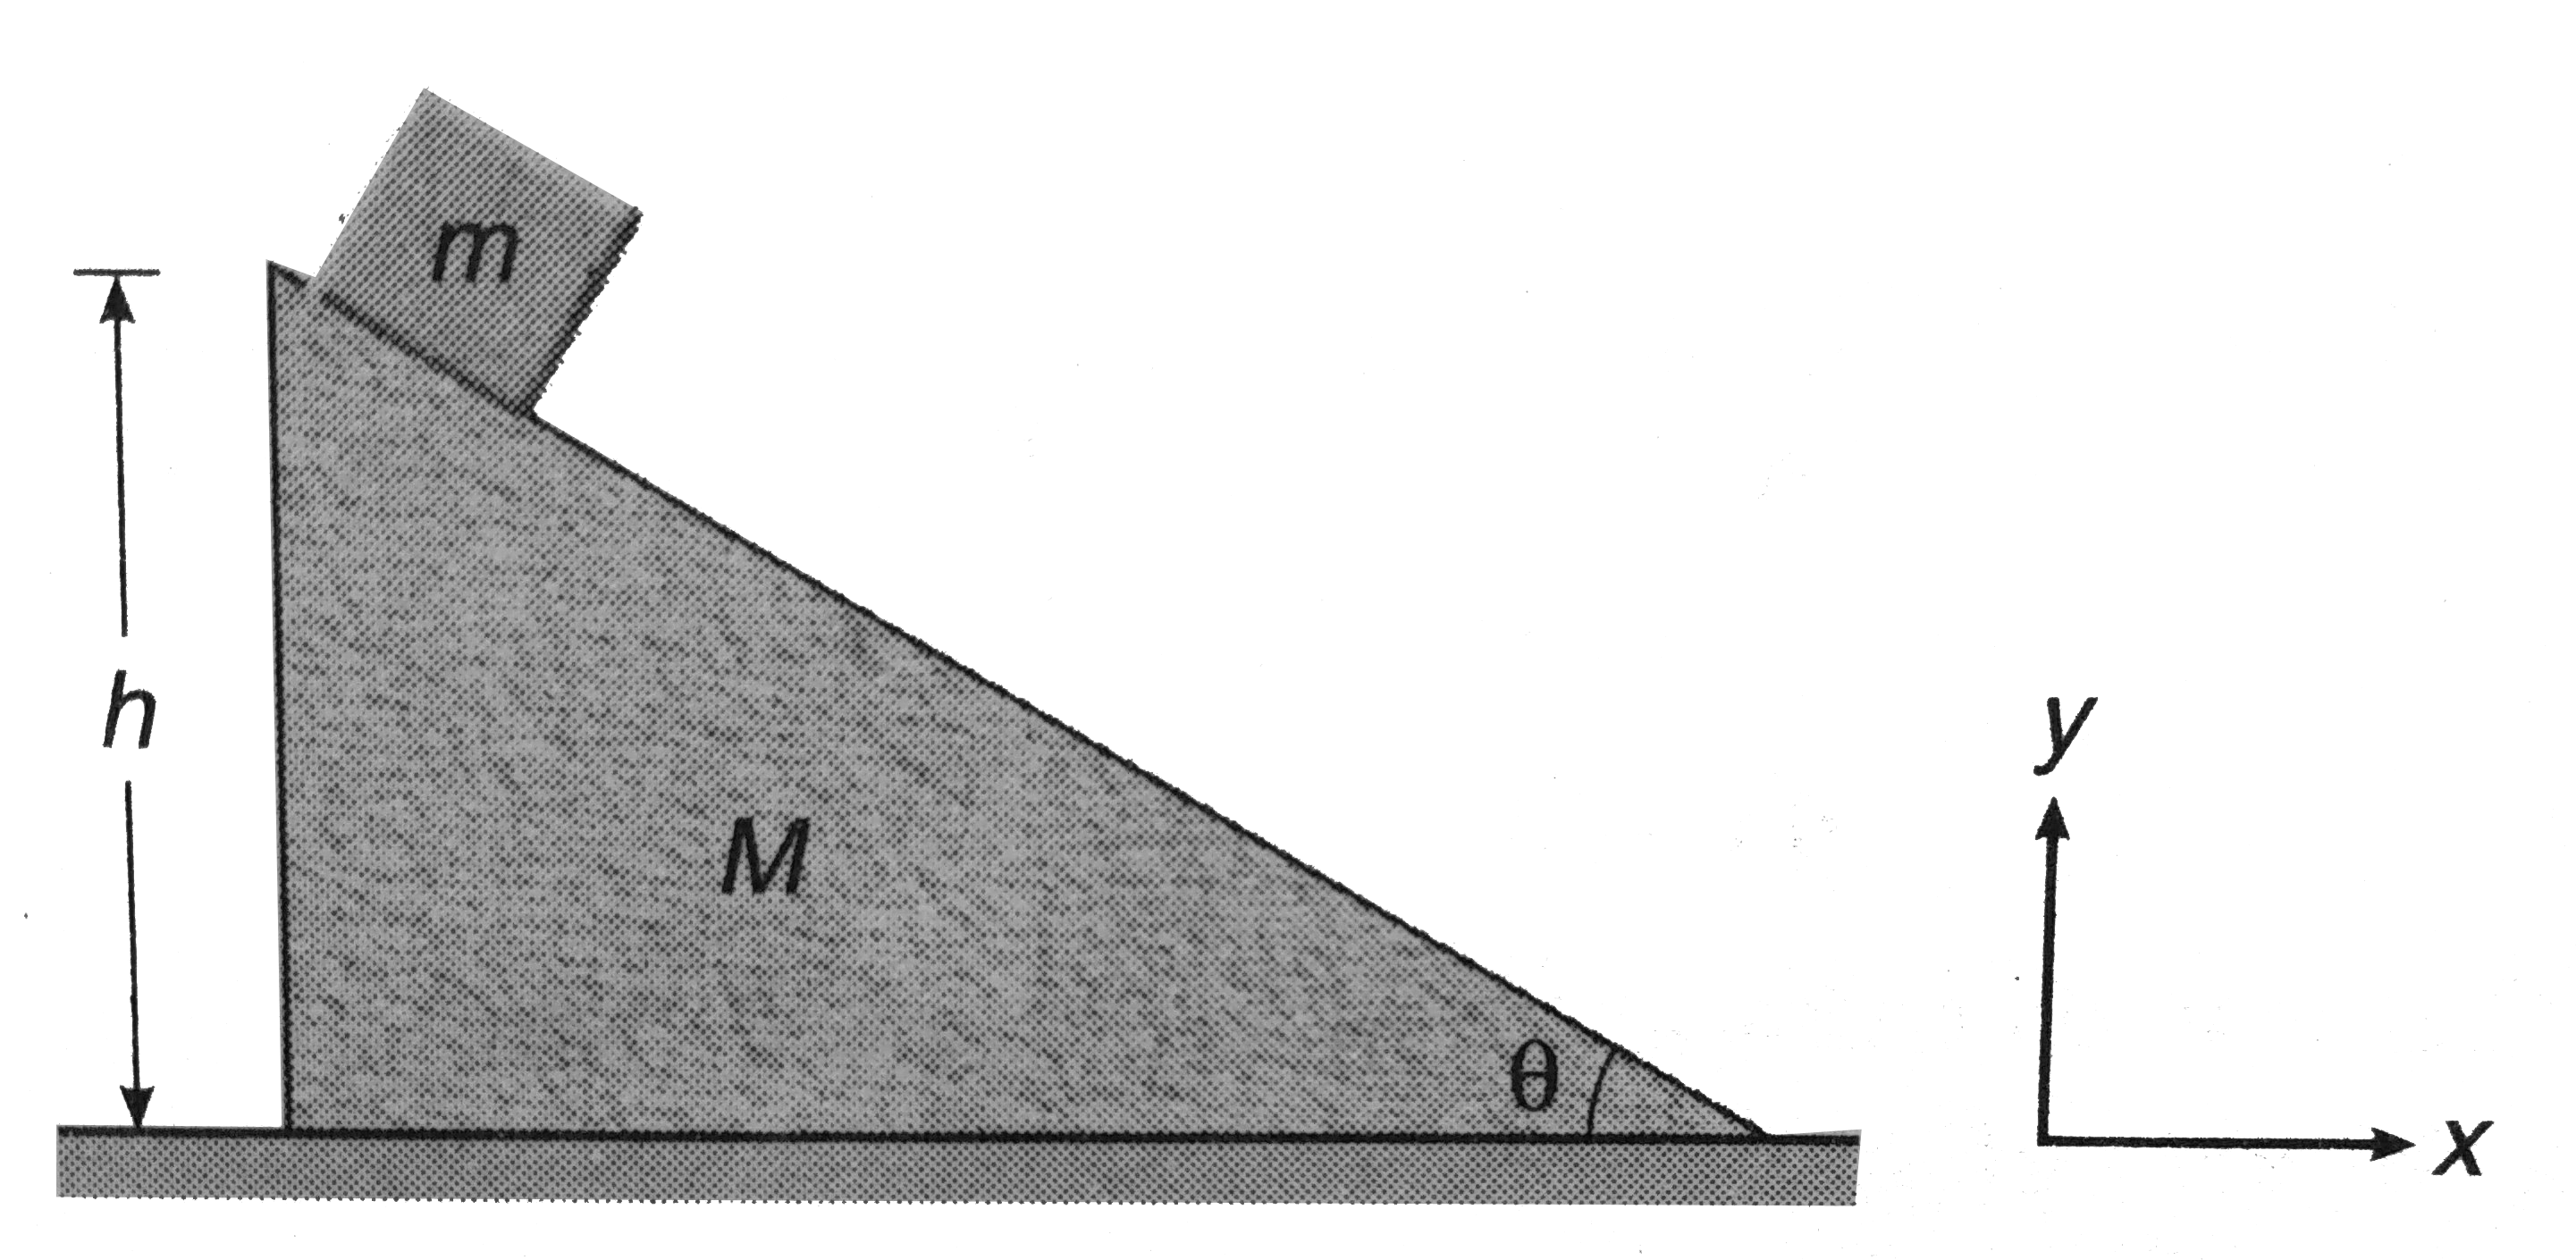 A block of mass m is released from the top of a wedge of mass M as shown in figure. Find the displacement of wedges on the horizontal ground when the block reaches the bottom of the wedges. Neglect friction everywhere.